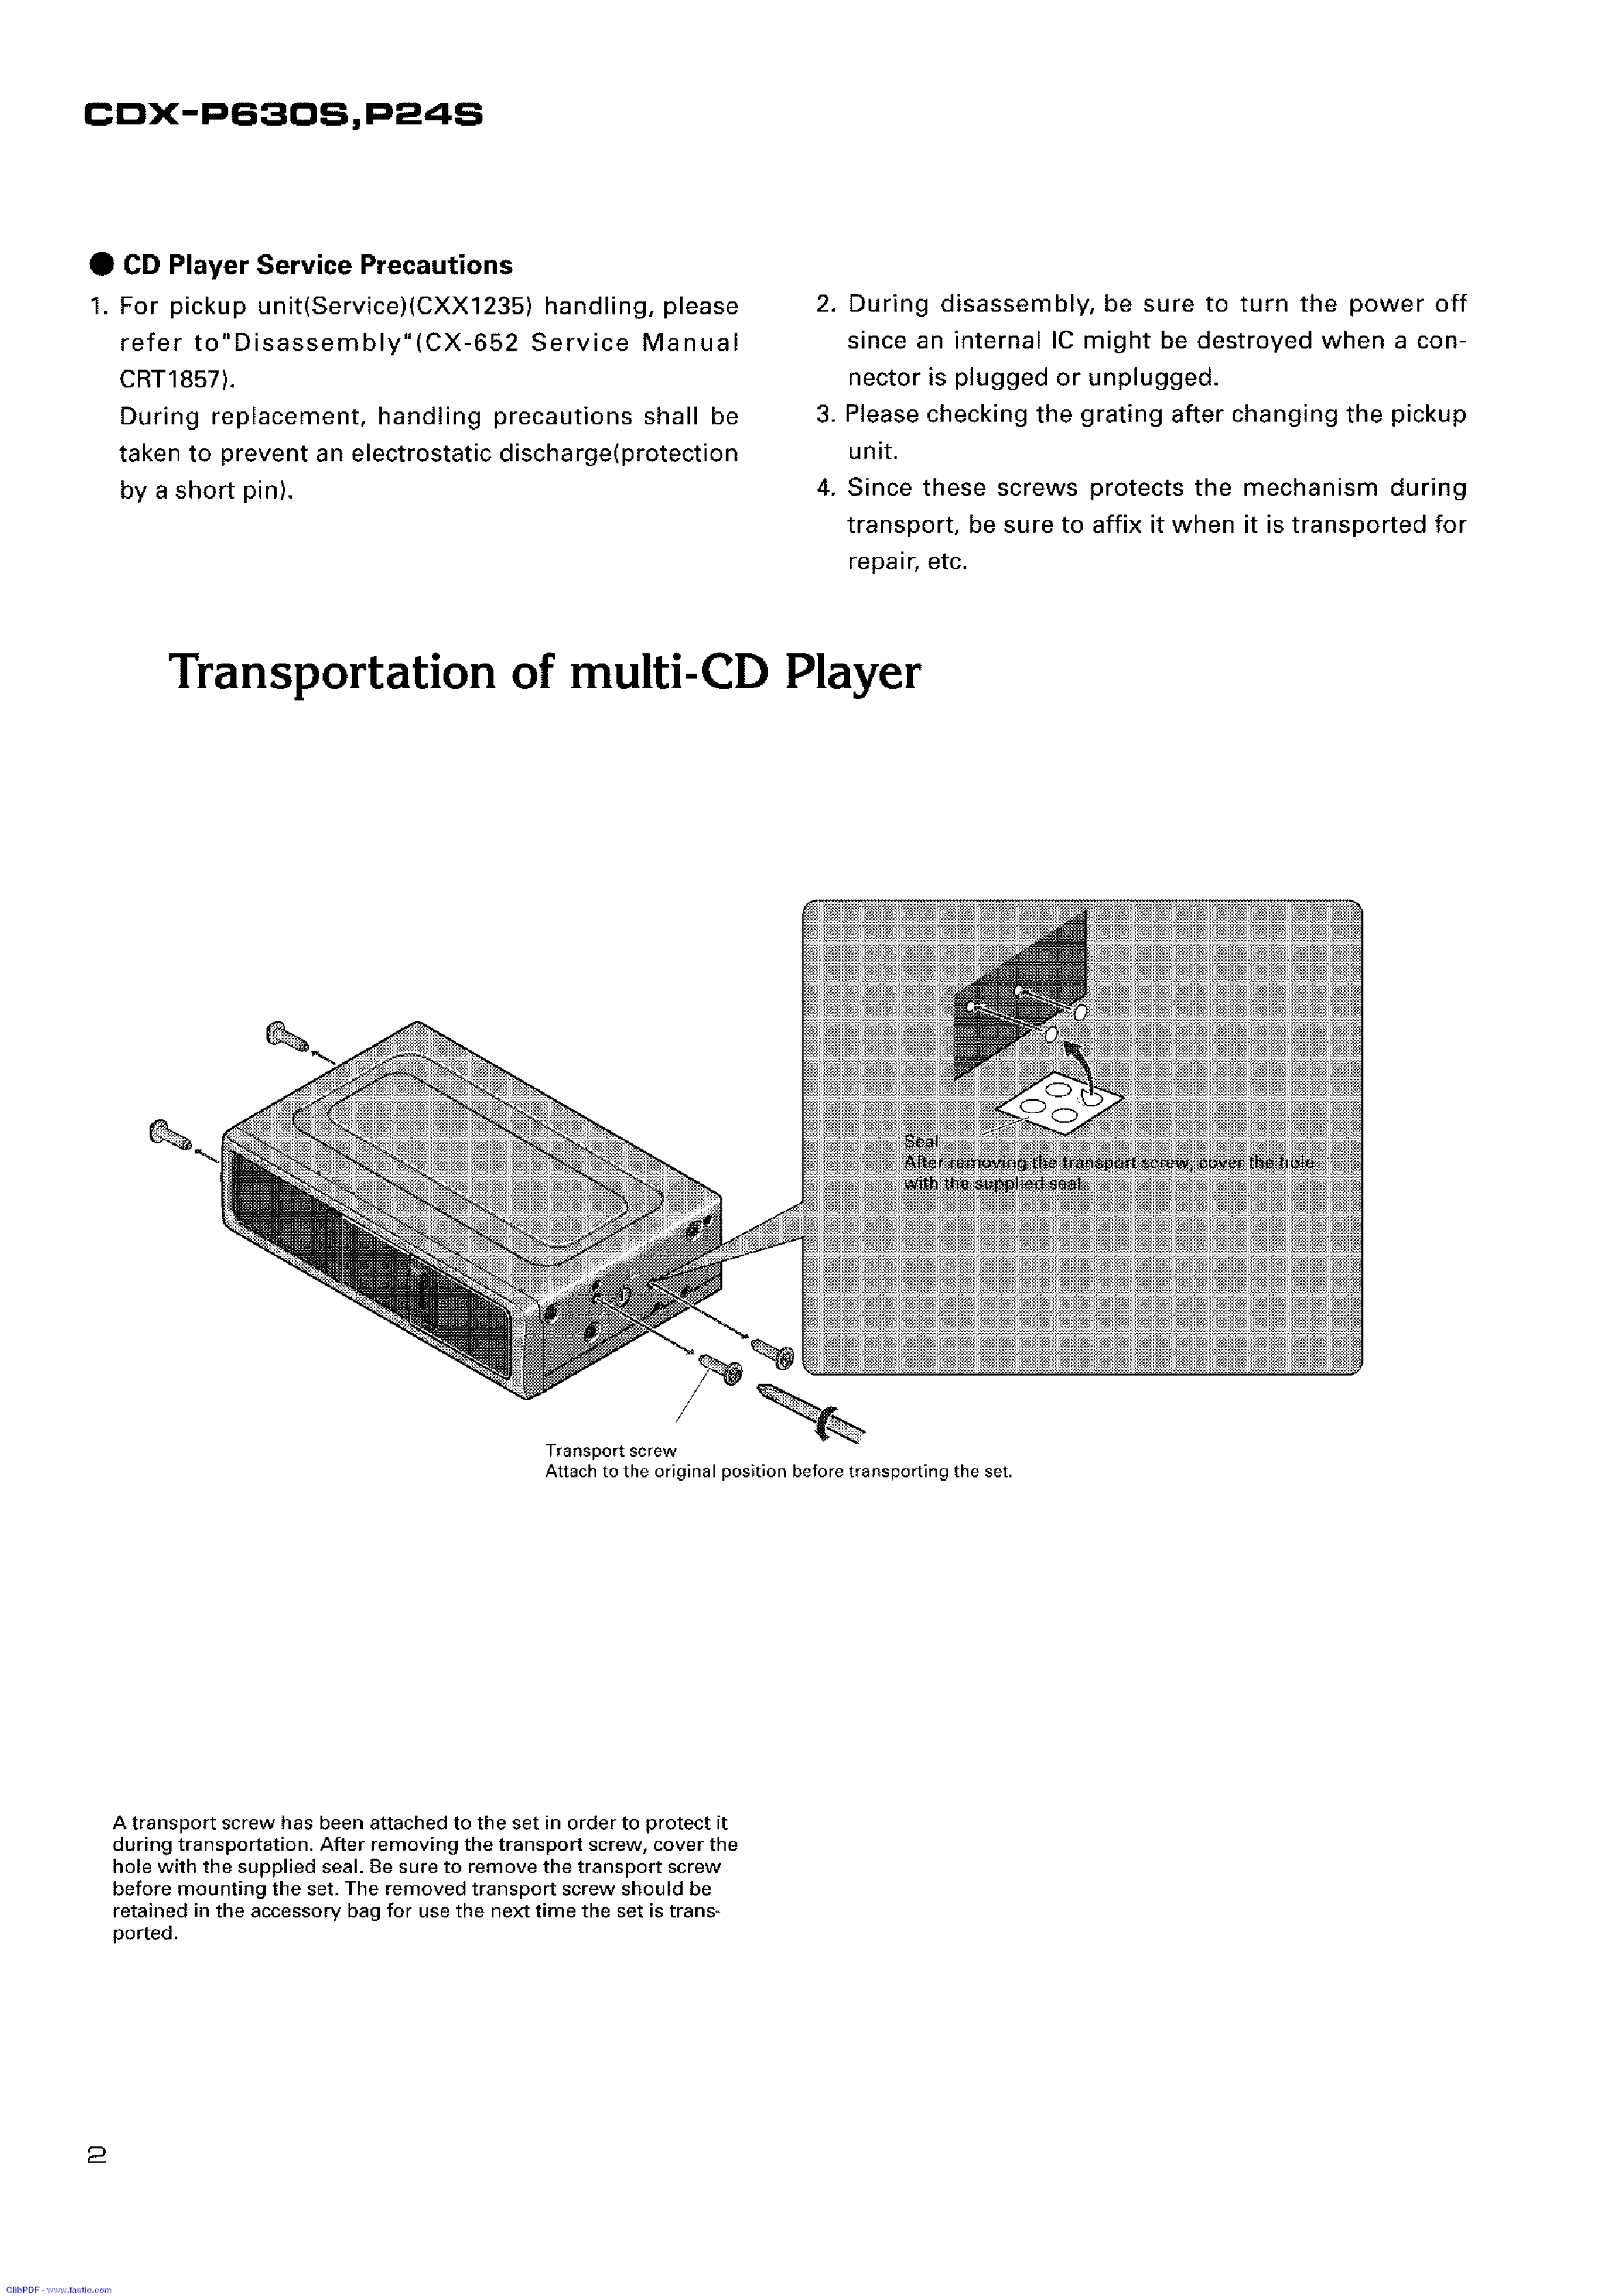 PIONEER CDX-P24S P630S SM service manual (2nd page)